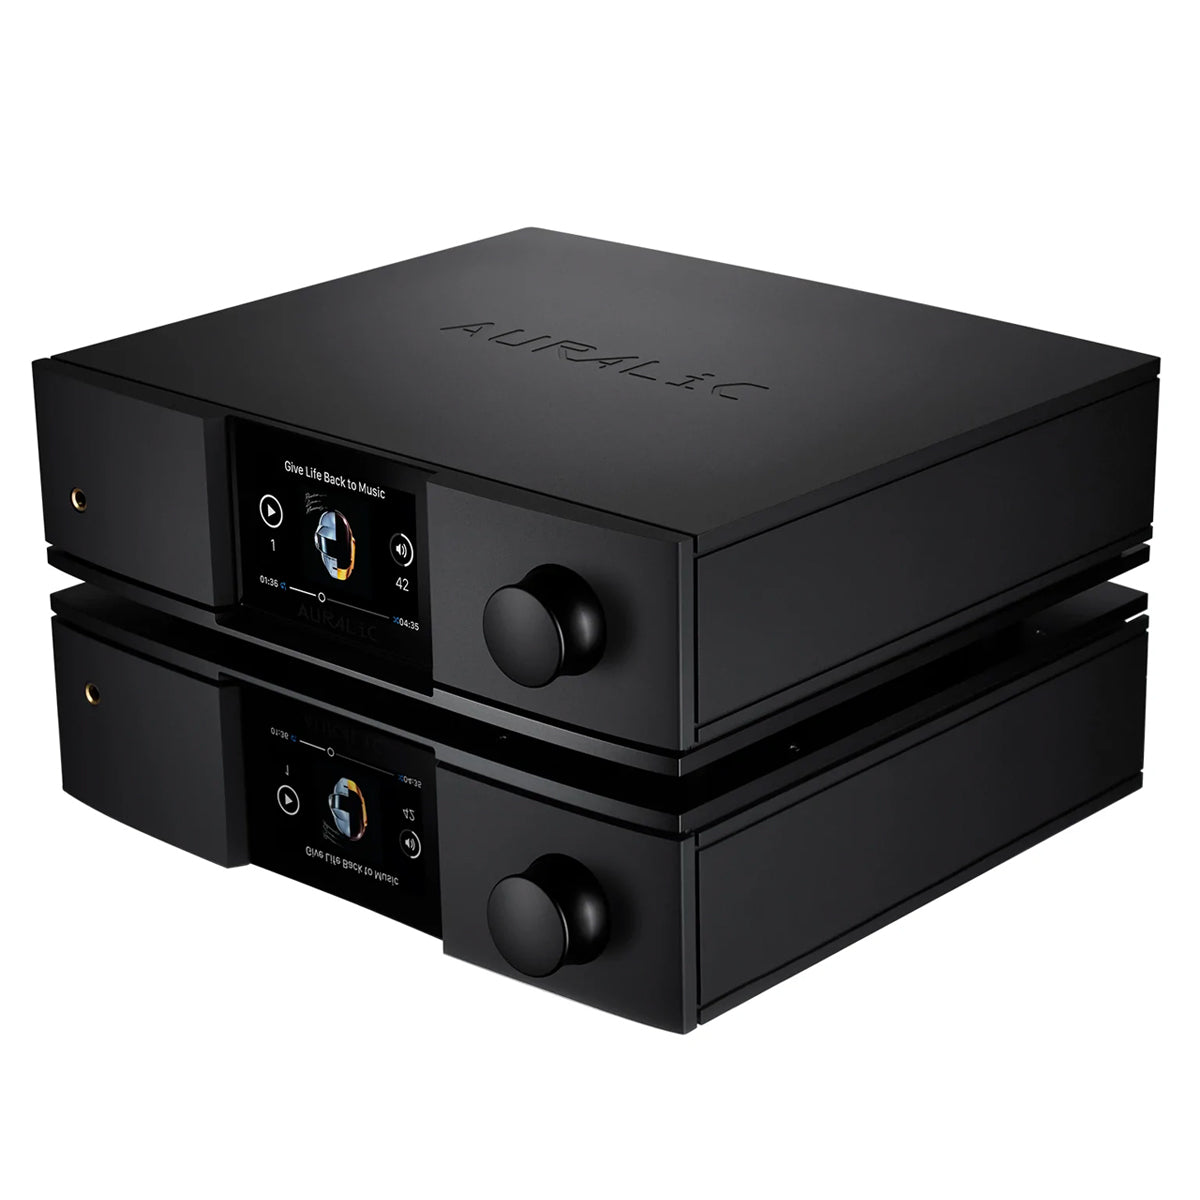 AURALIC Altair G2.1 Streaming DAC Preamplifier - The Audio Experts